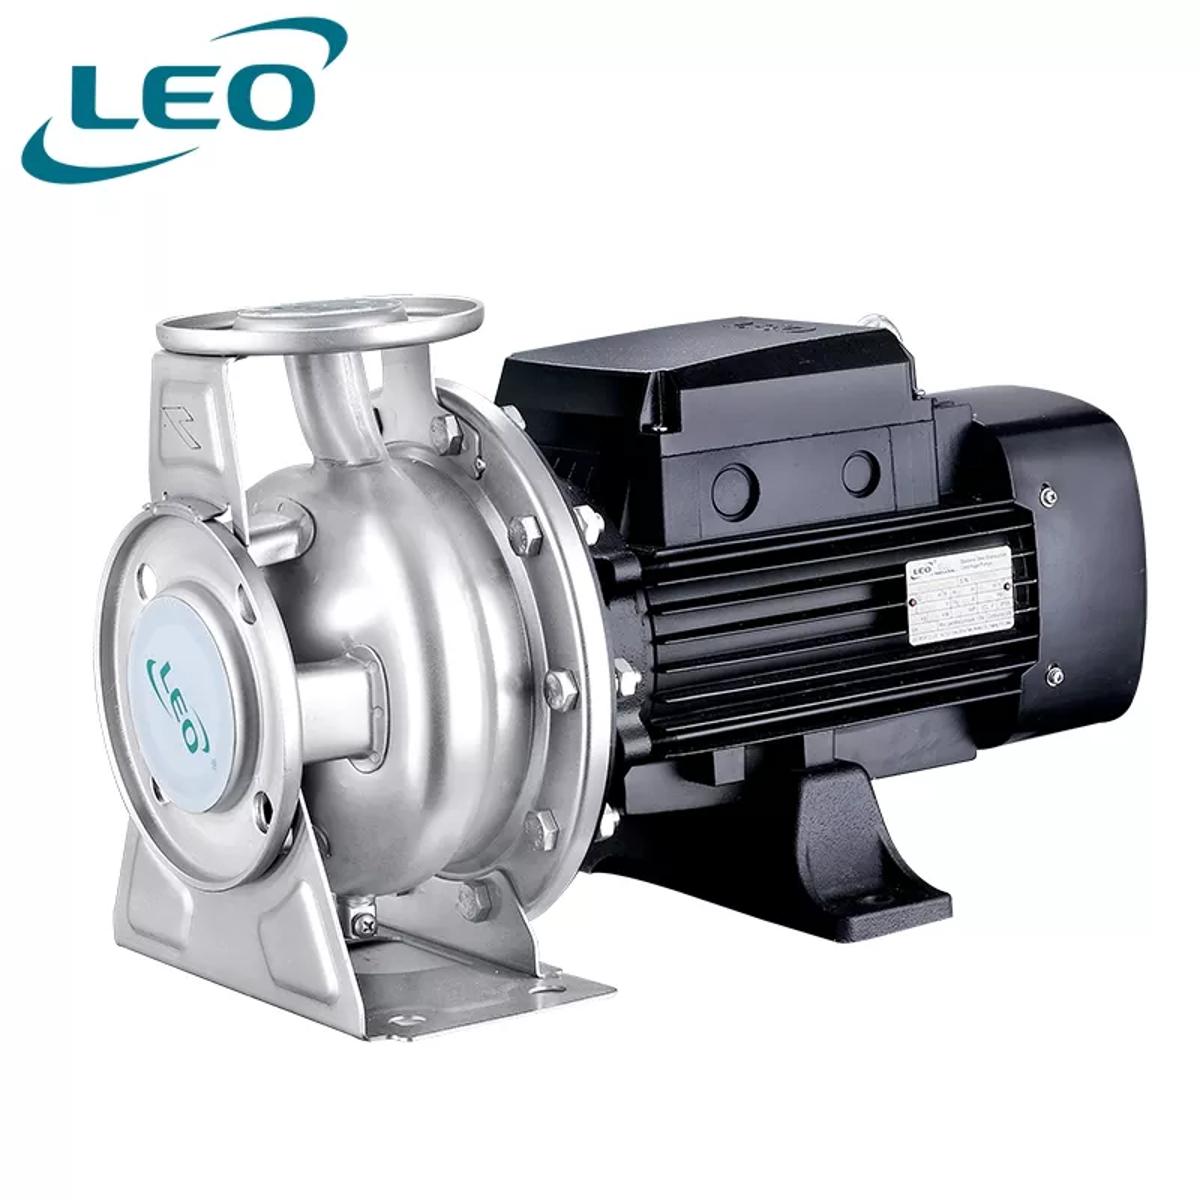 LEO - XZS-65-50-160-30 - 3000 W - 4.0 HP - Clean Water Stainless Steel HEAVY DUTY Centrifugal Pump FLANGE TYPE  - 380V~400V THREE PHASE - SIZE :- 2 1-2 " x 2 " - European STANDARD